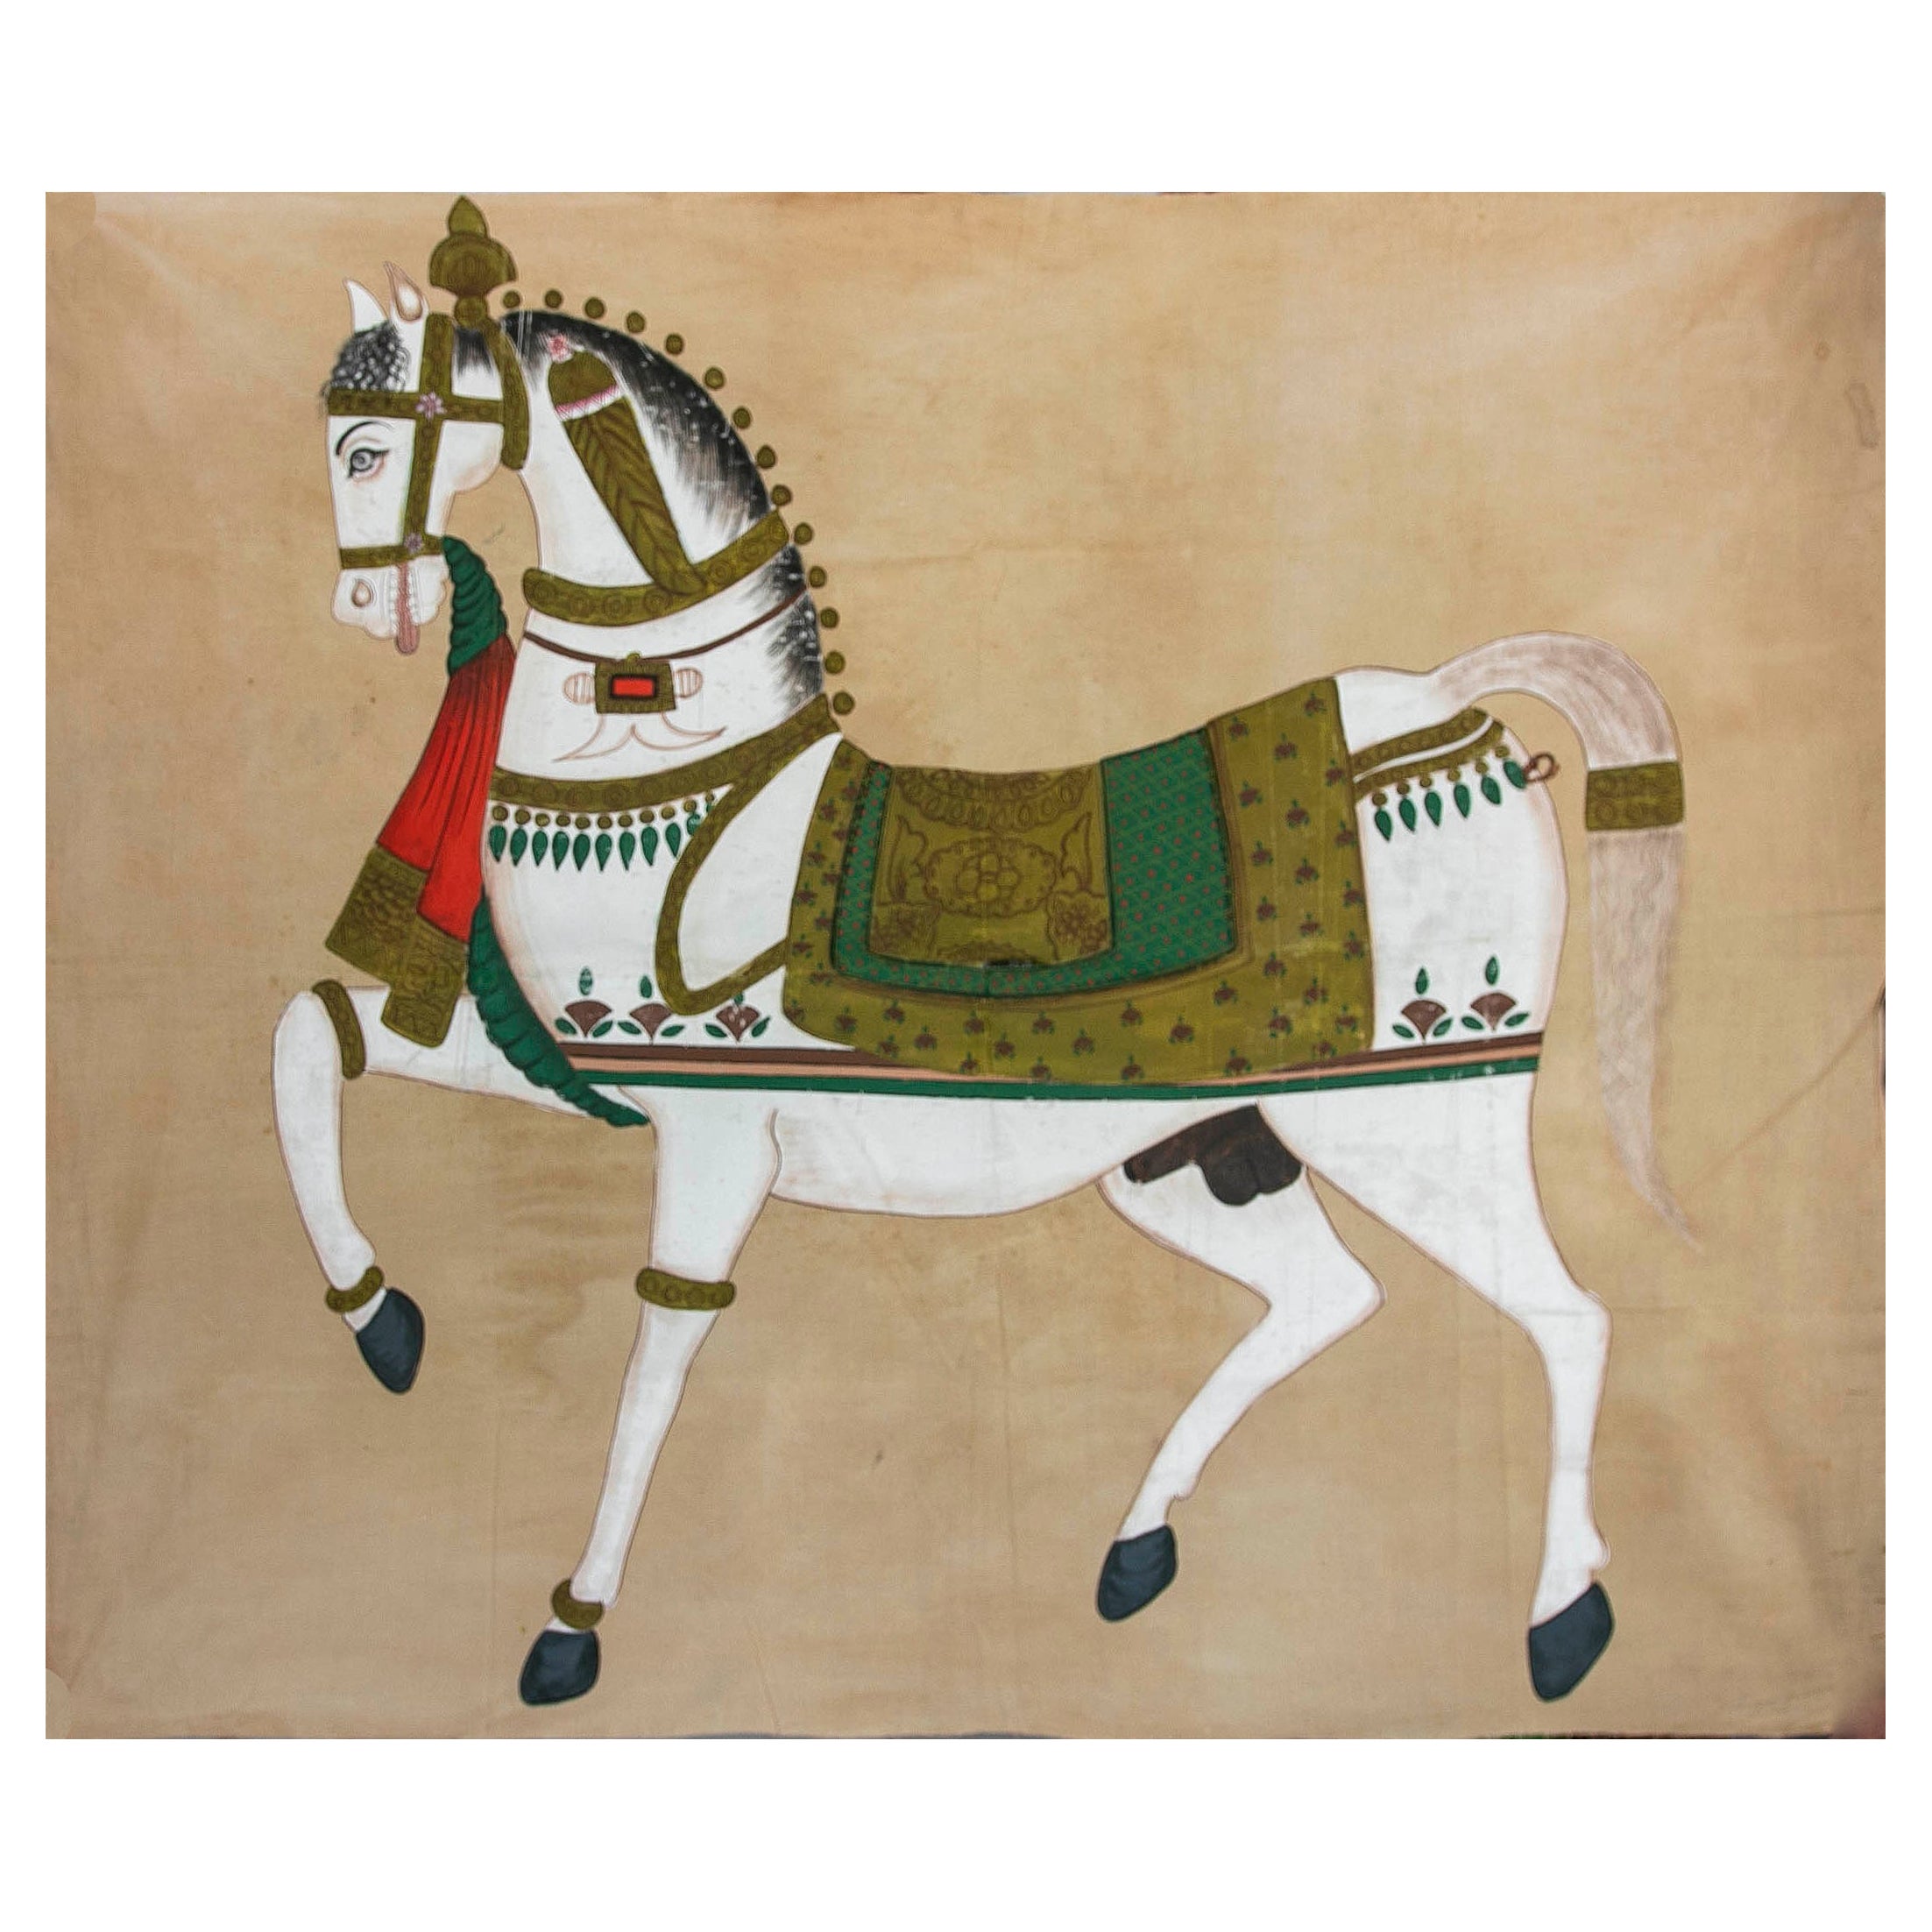 1970s Jaime Parlade Designer Hand Painting "Walking Horse" Oil on Canvas For Sale